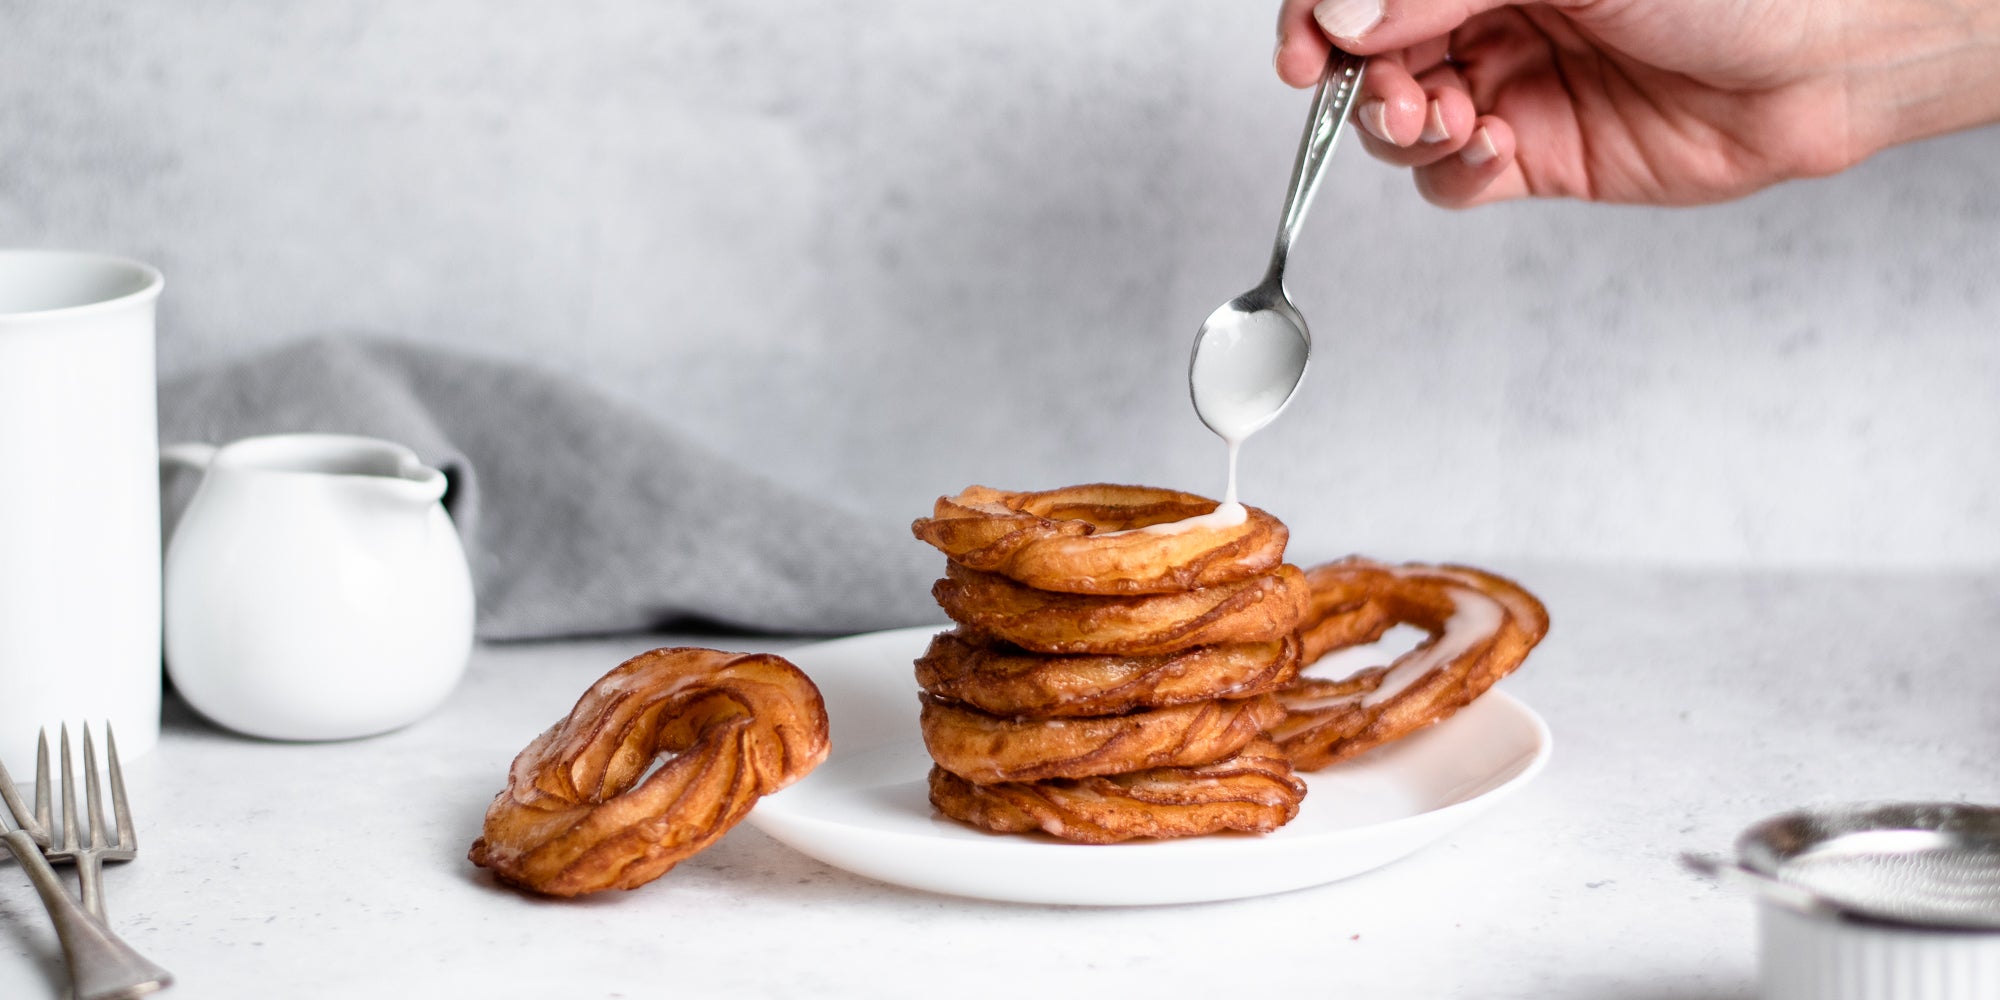 Stack of Apple Cider Crullers being drizzled with Icing with a hand holding a spoon